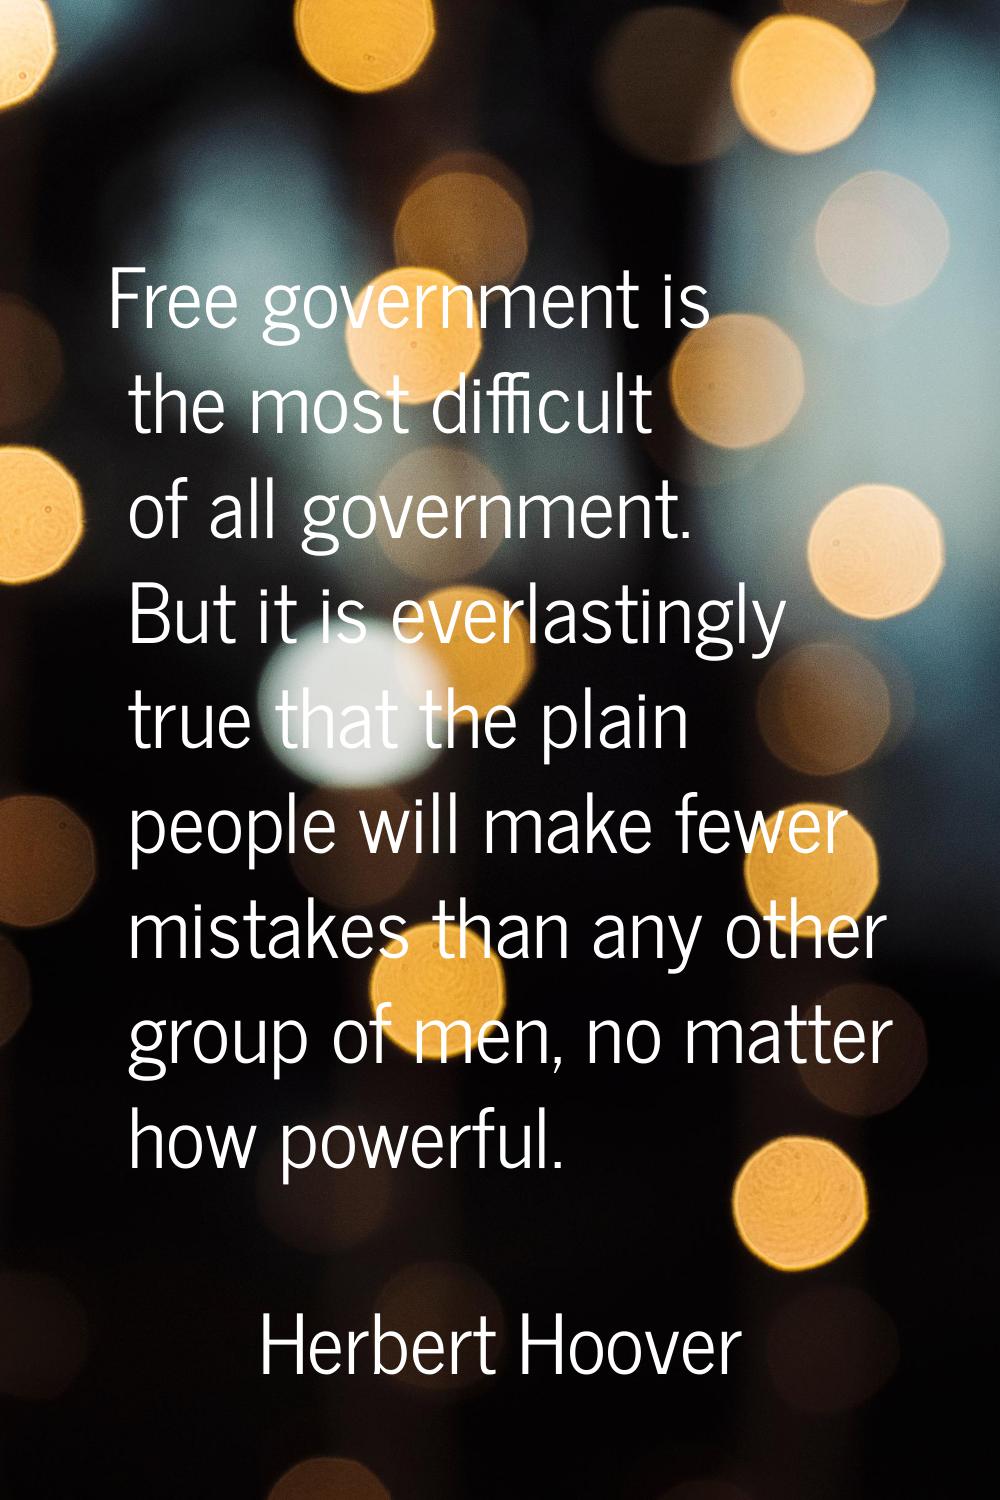 Free government is the most difficult of all government. But it is everlastingly true that the plai